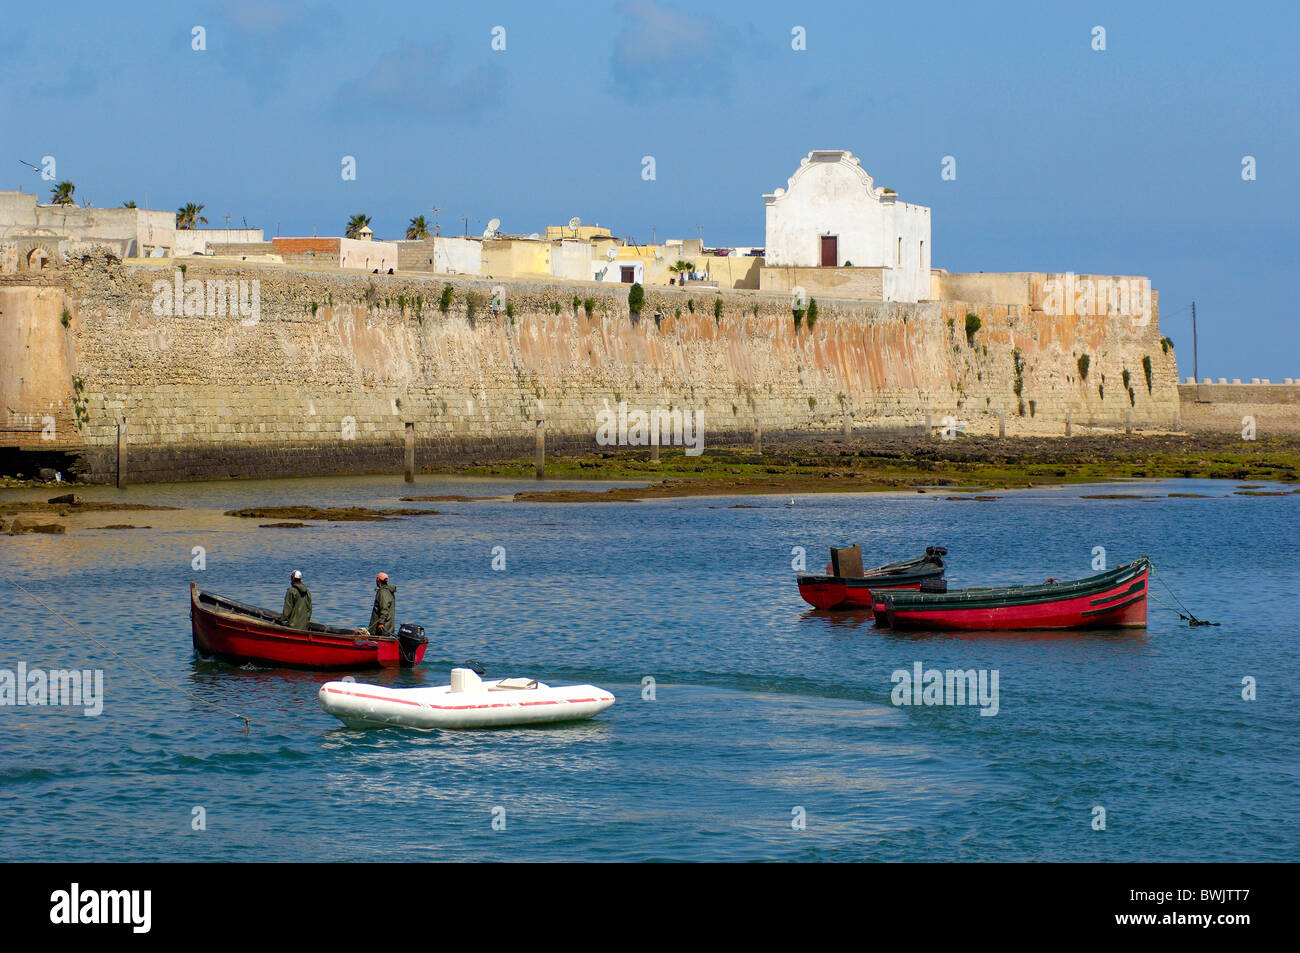 Fischer boats fishing boats town wall Old Town harbour port coast sea El Jadida Morocco Africa North Afric Stock Photo